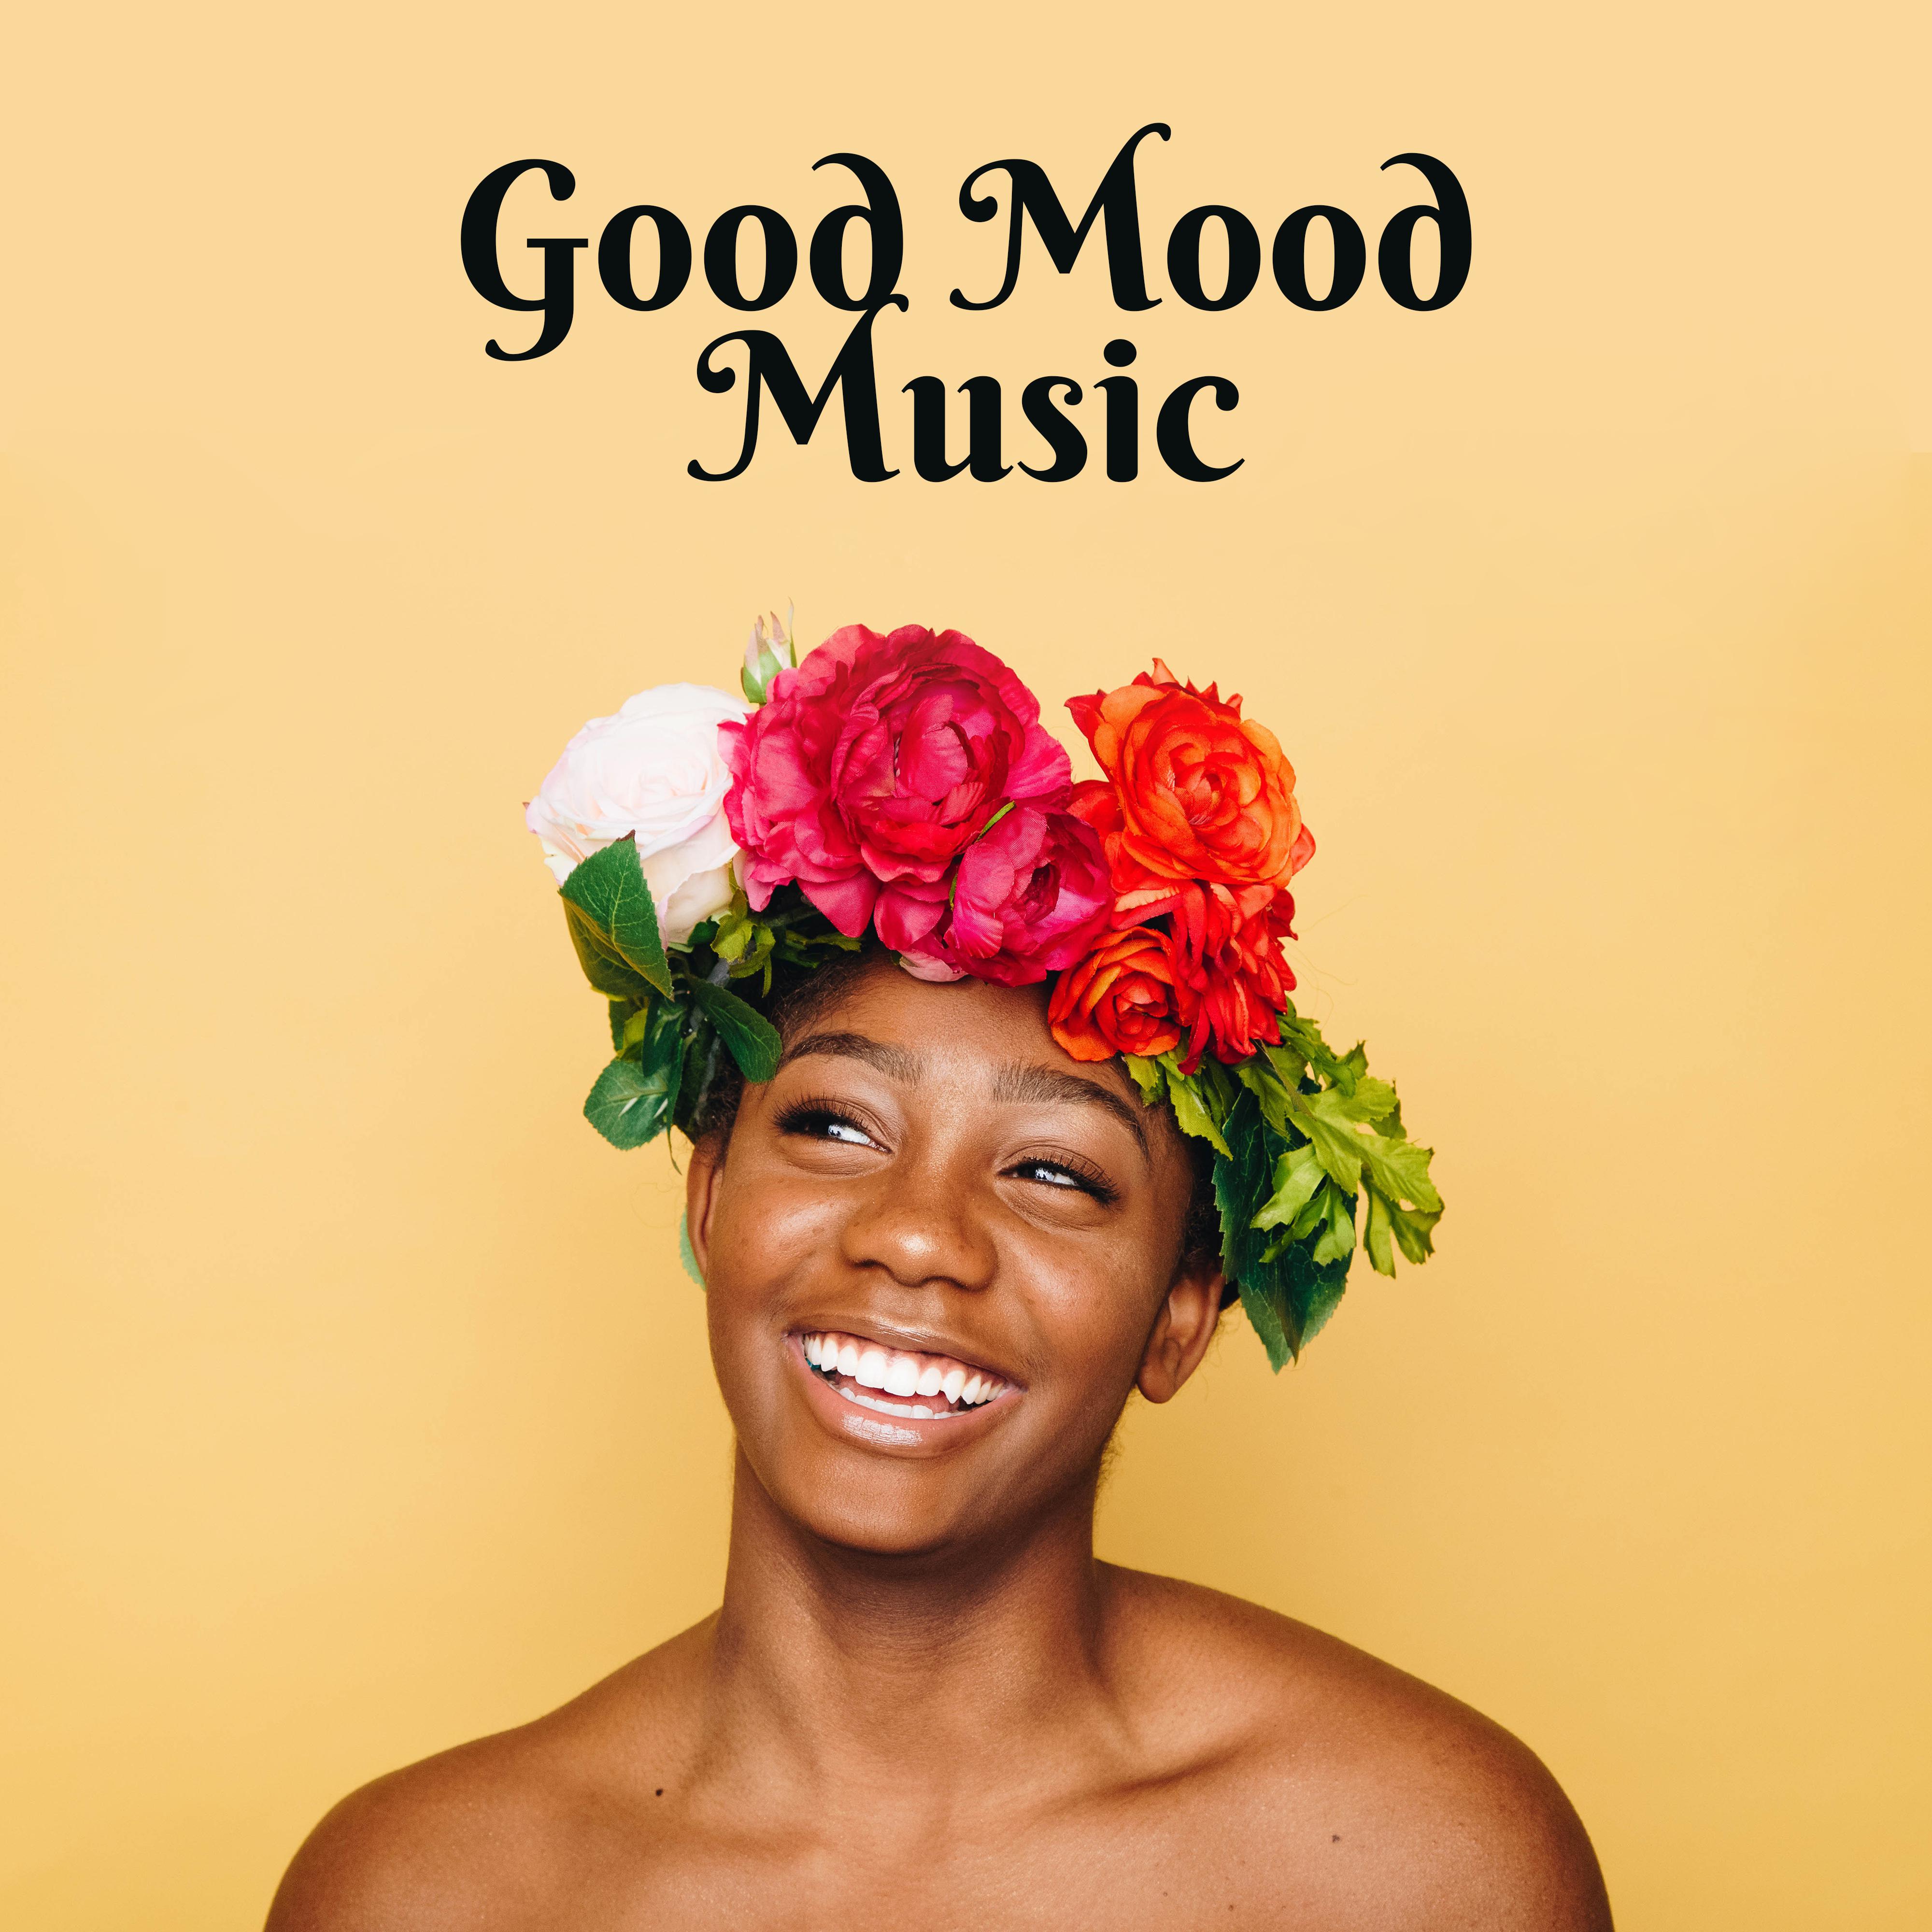 Good Mood Music – Relaxing Music, Positive Vibes, New Age, Natural Sounds, Rest